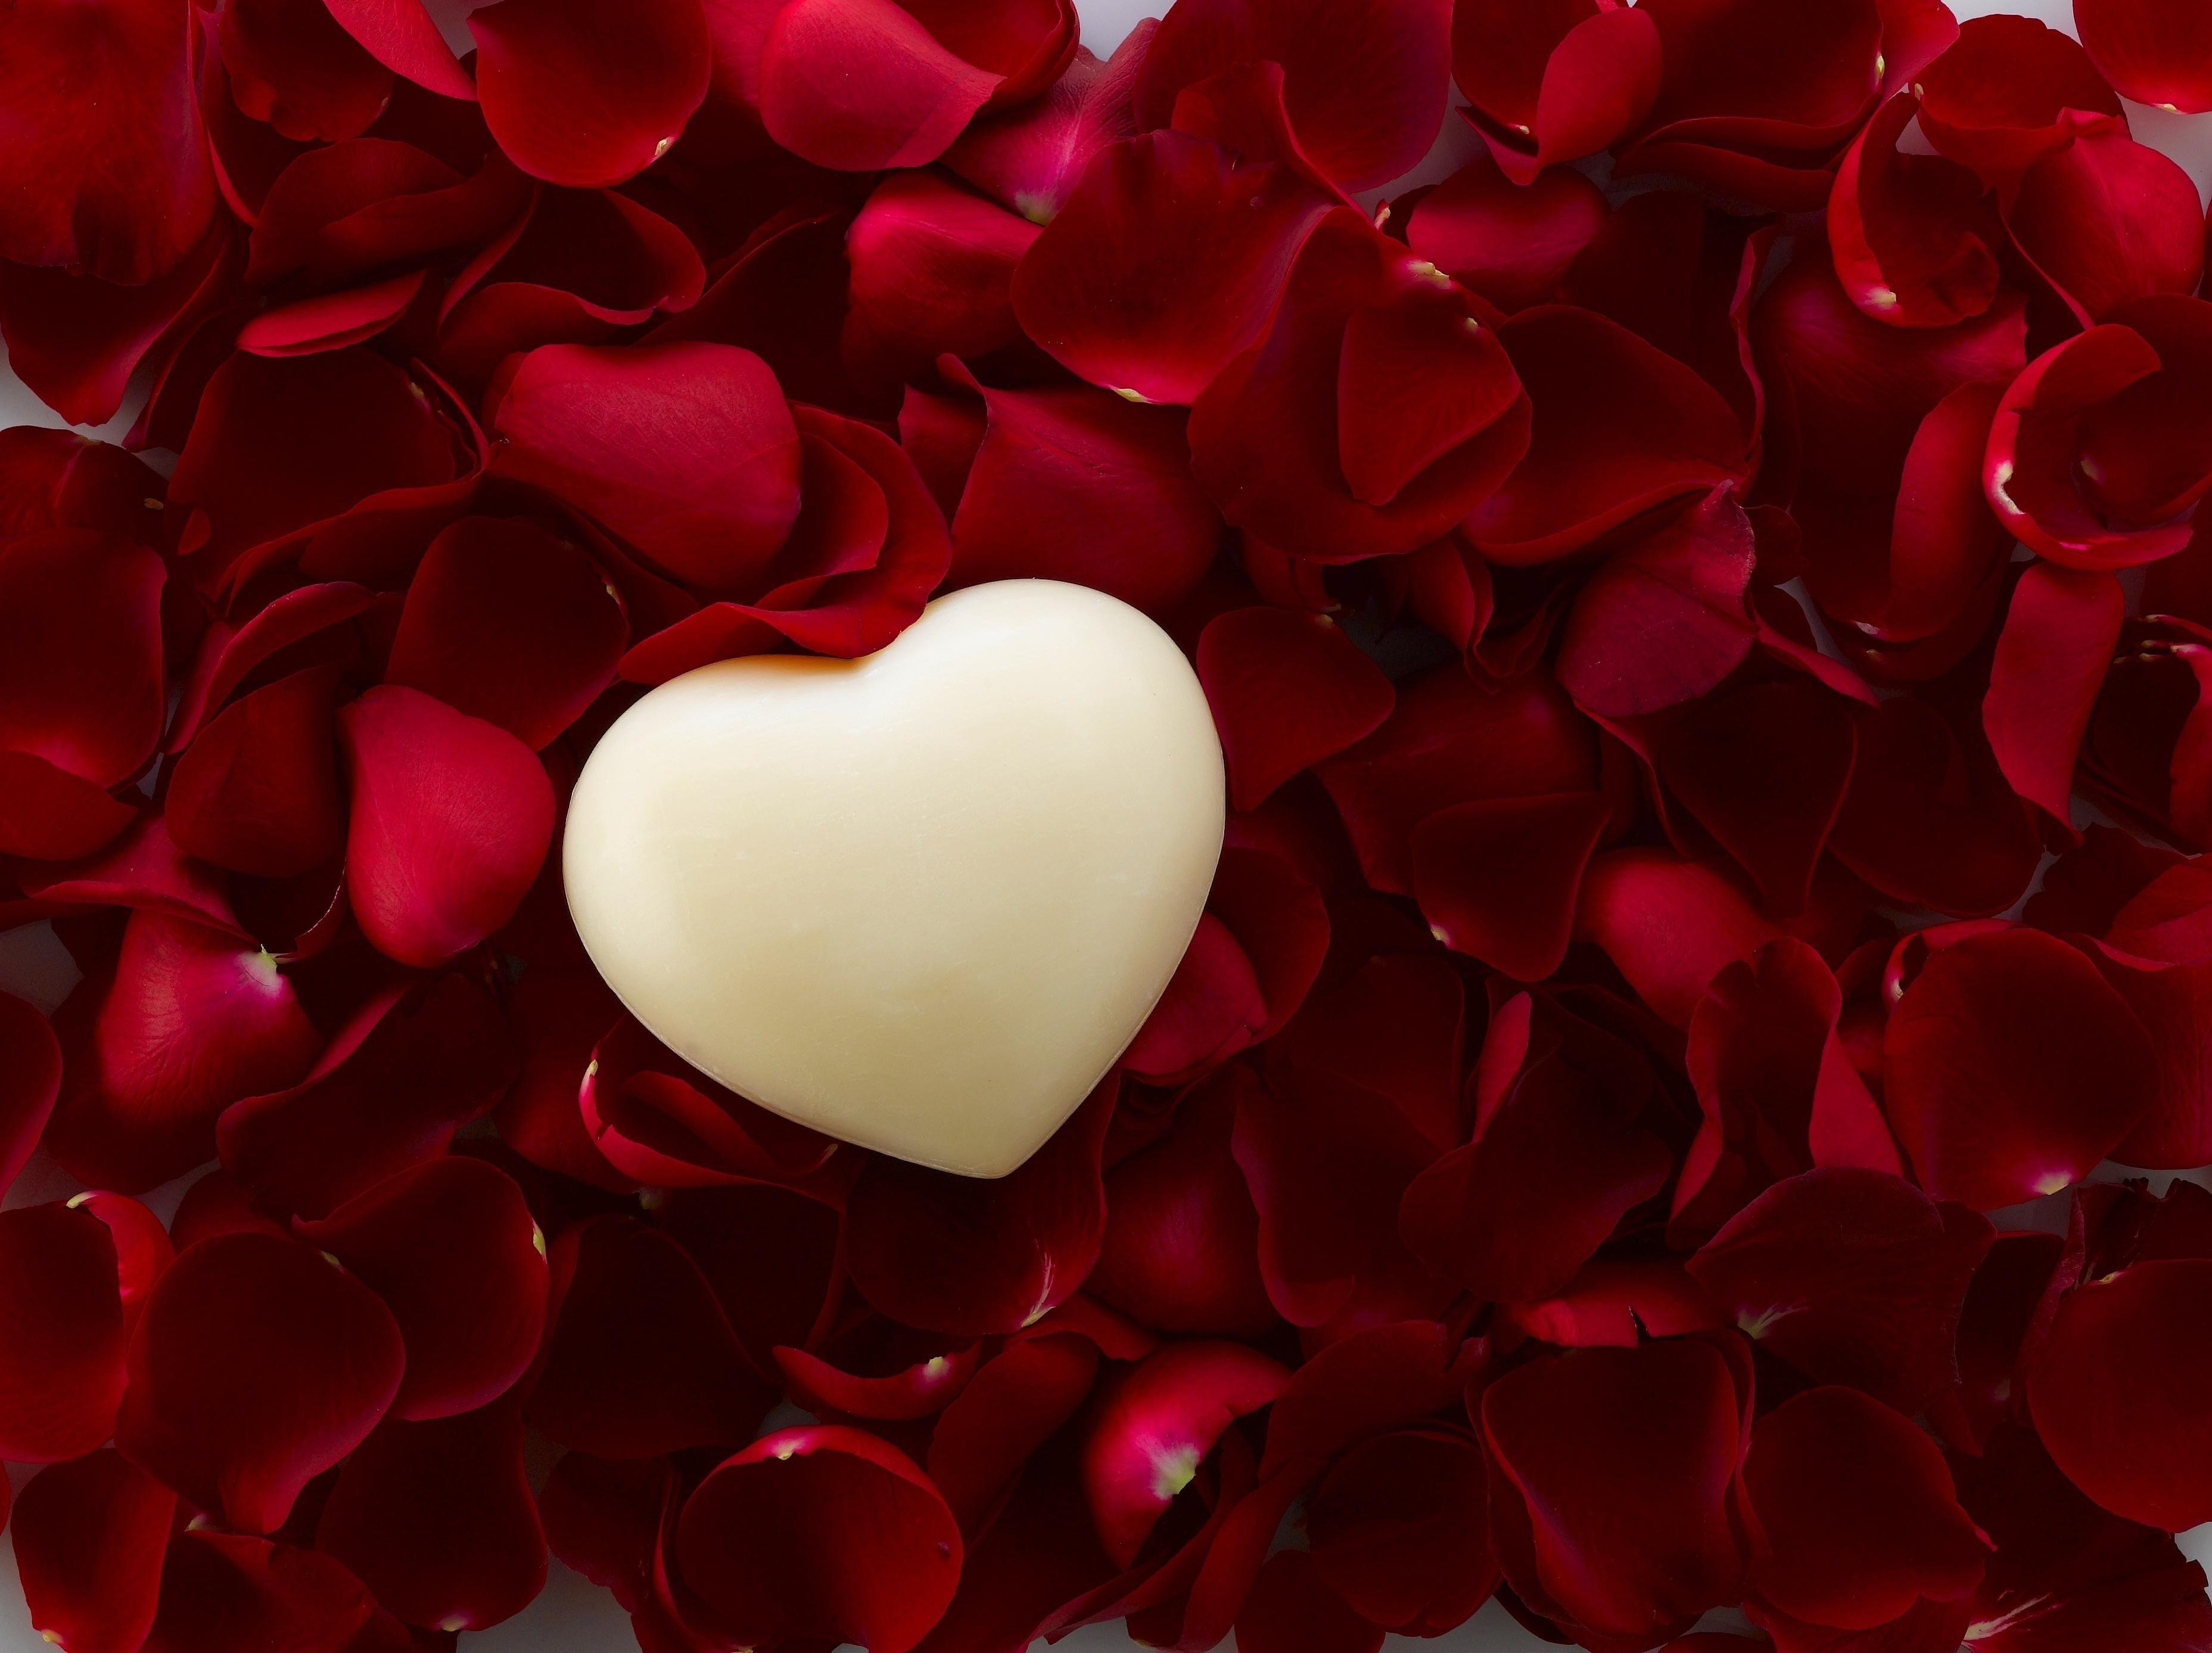 White Heart and Red Rose Petals Full HD Wallpaper and Background